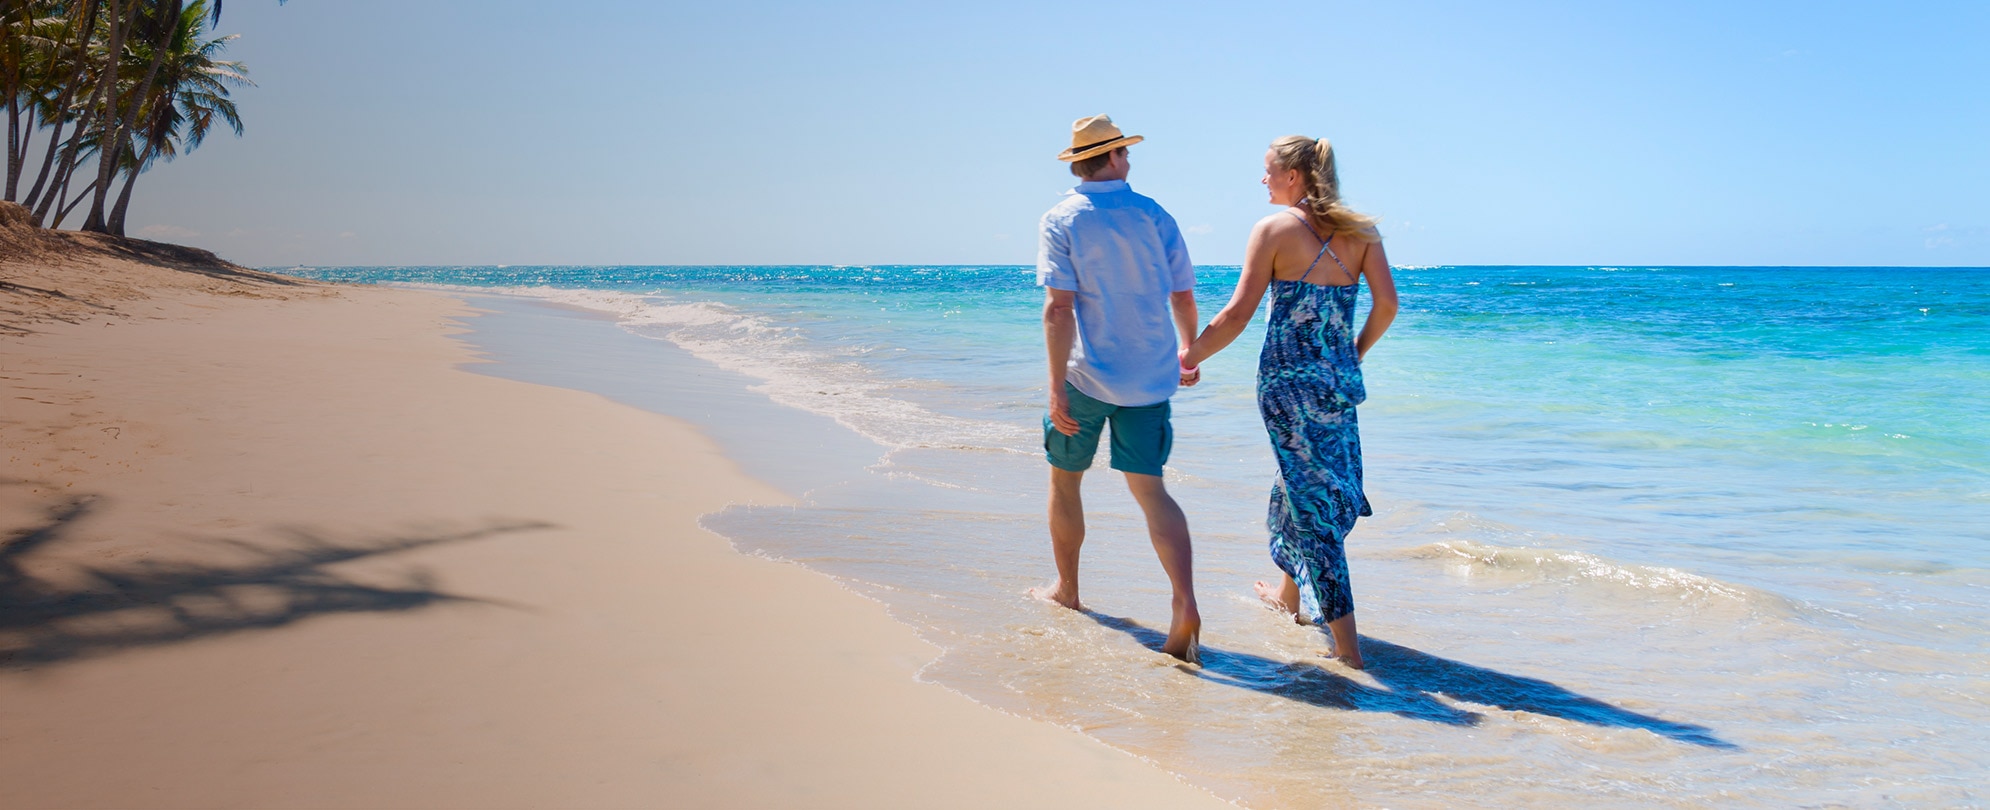 A man and woman holding hands and walking down the beach on their Margaritaville vacation.